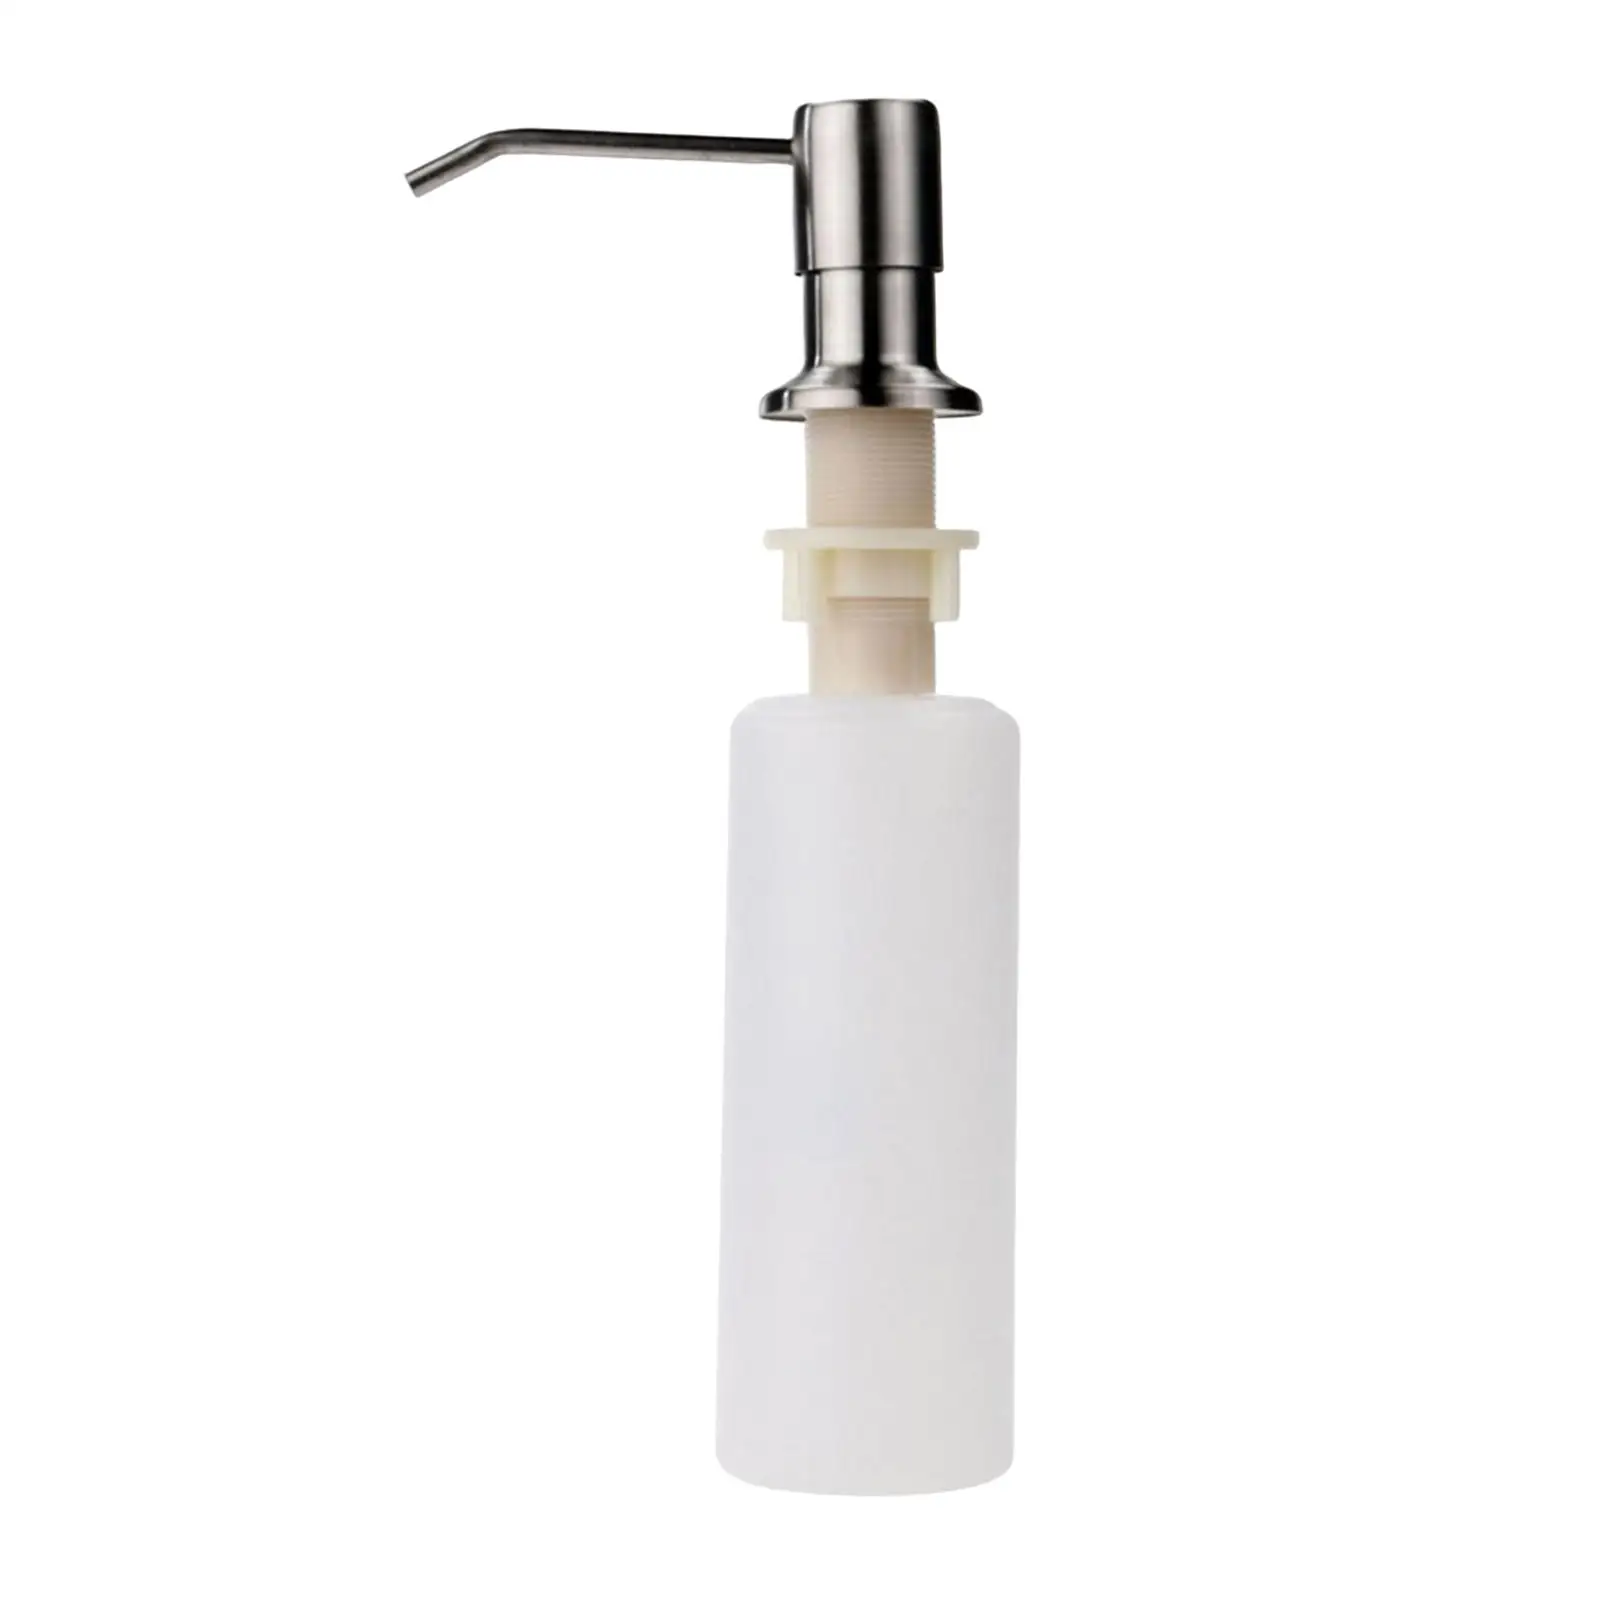 Soap Dispenser Stainless Steel Convenient Lotion Bottle Reusable Pump for Sink Opening 25mm~36mm Bathroom Hotel Supply Kitchen